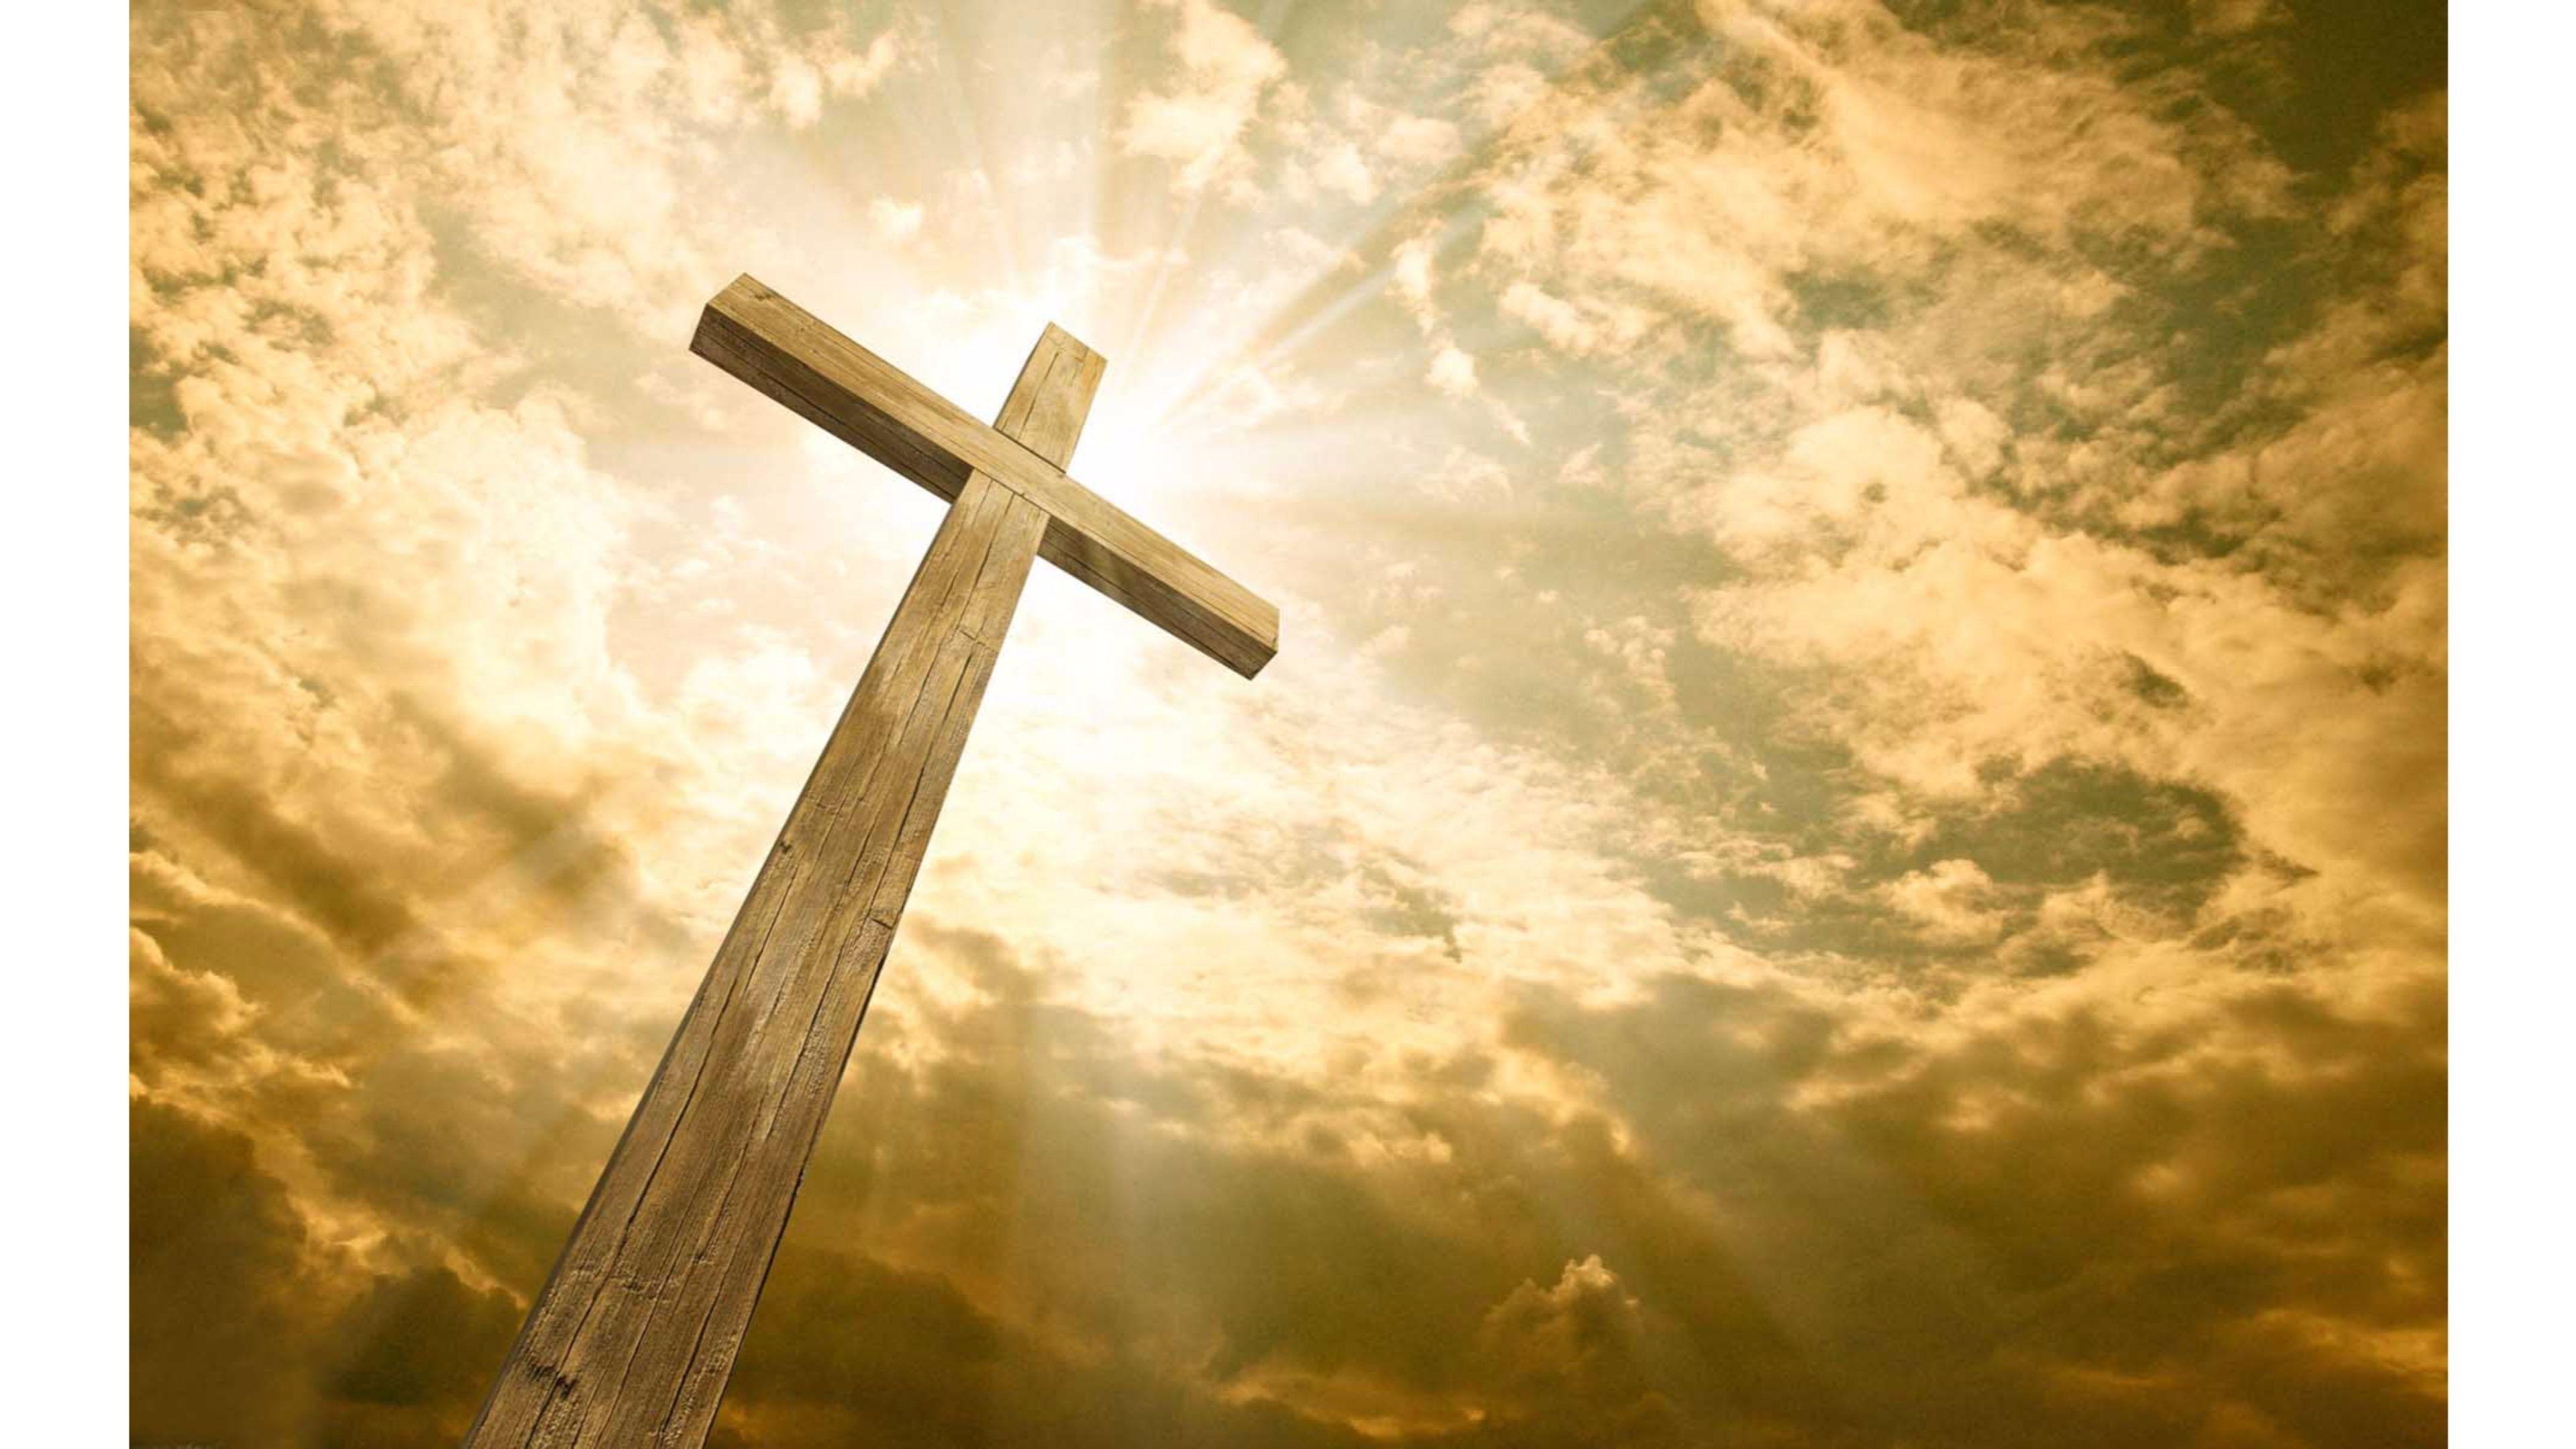 Religious Easter Wallpapers  Top Free Religious Easter Backgrounds   WallpaperAccess